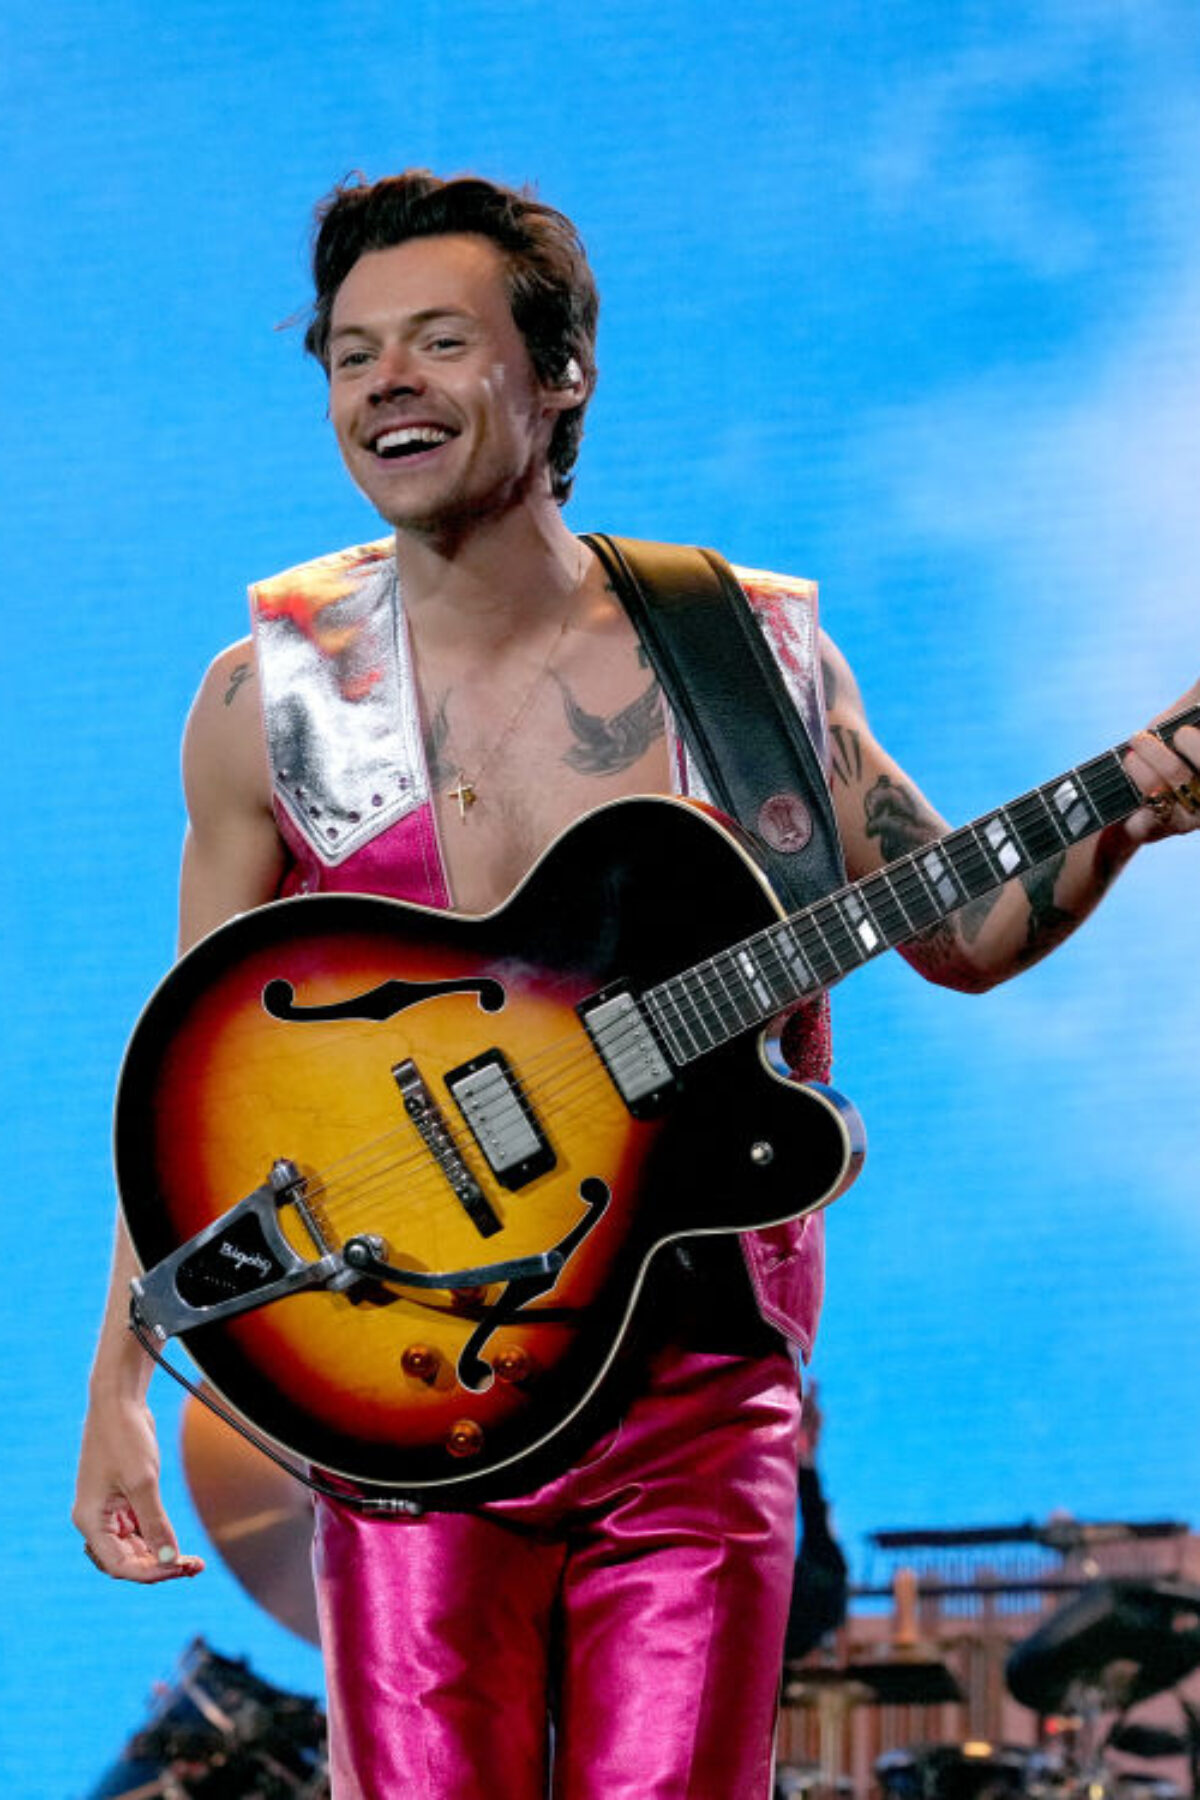 INDIO, CALIFORNIA - APRIL 22: Harry Styles performs on the Coachella stage during the 2022 Coachella Valley Music And Arts Festival on April 22, 2022 in Indio, California. (Photo by Kevin Mazur/Getty Images for Harry Styles)